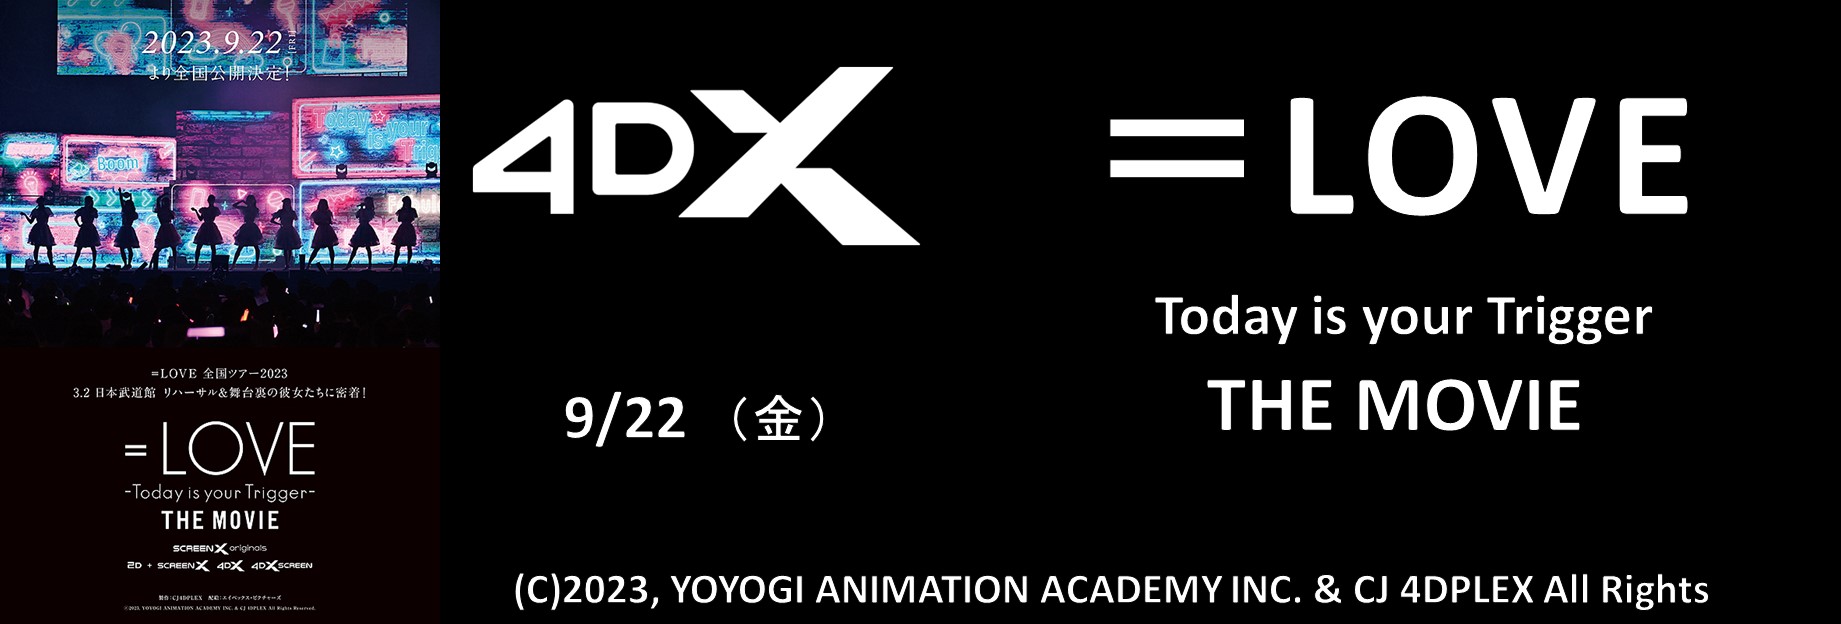 LOVE-Today-is-your-Trigger-THE-MOVIE　4DX